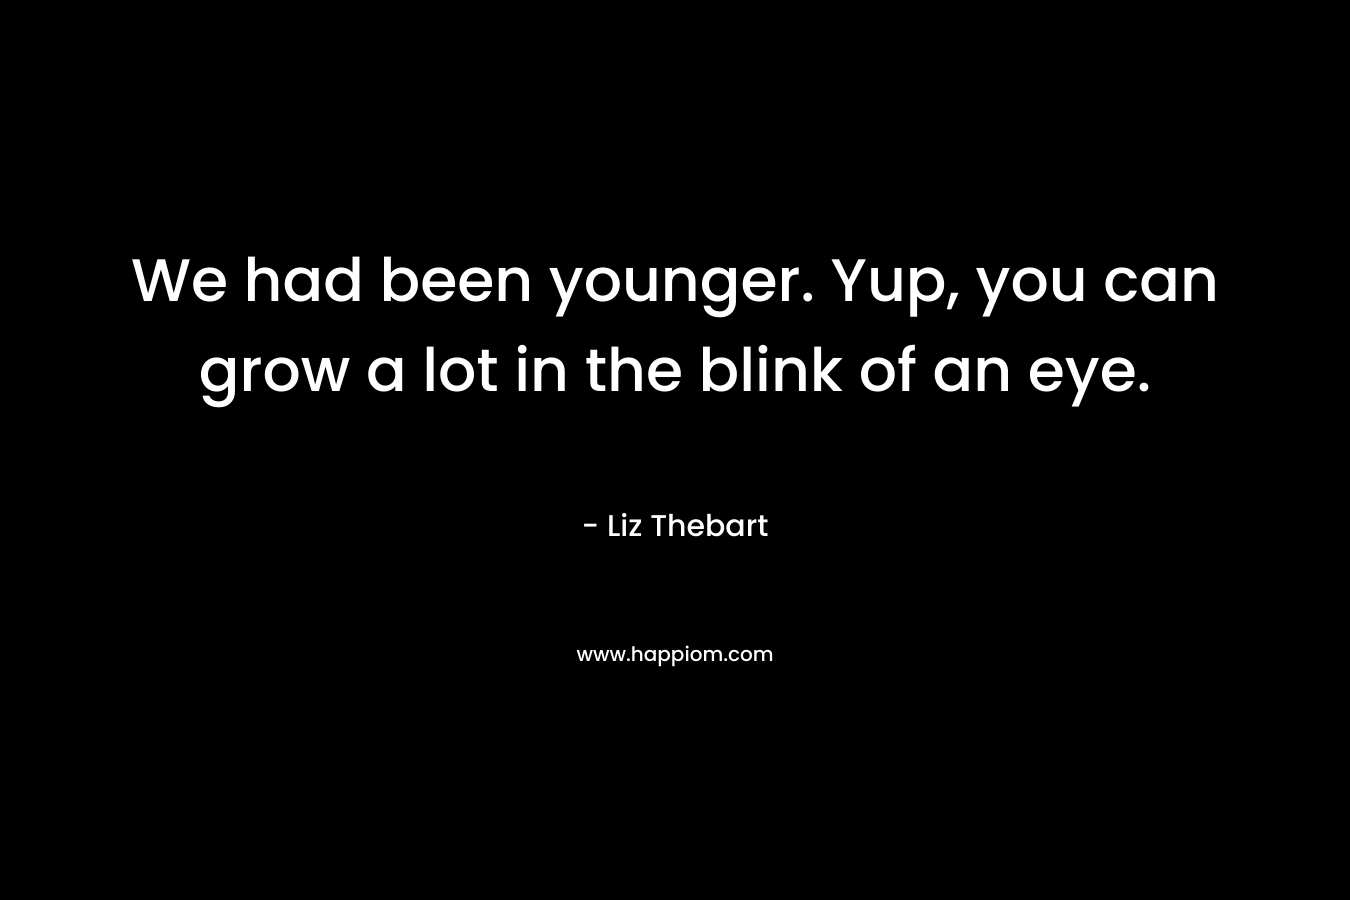 We had been younger. Yup, you can grow a lot in the blink of an eye. – Liz Thebart